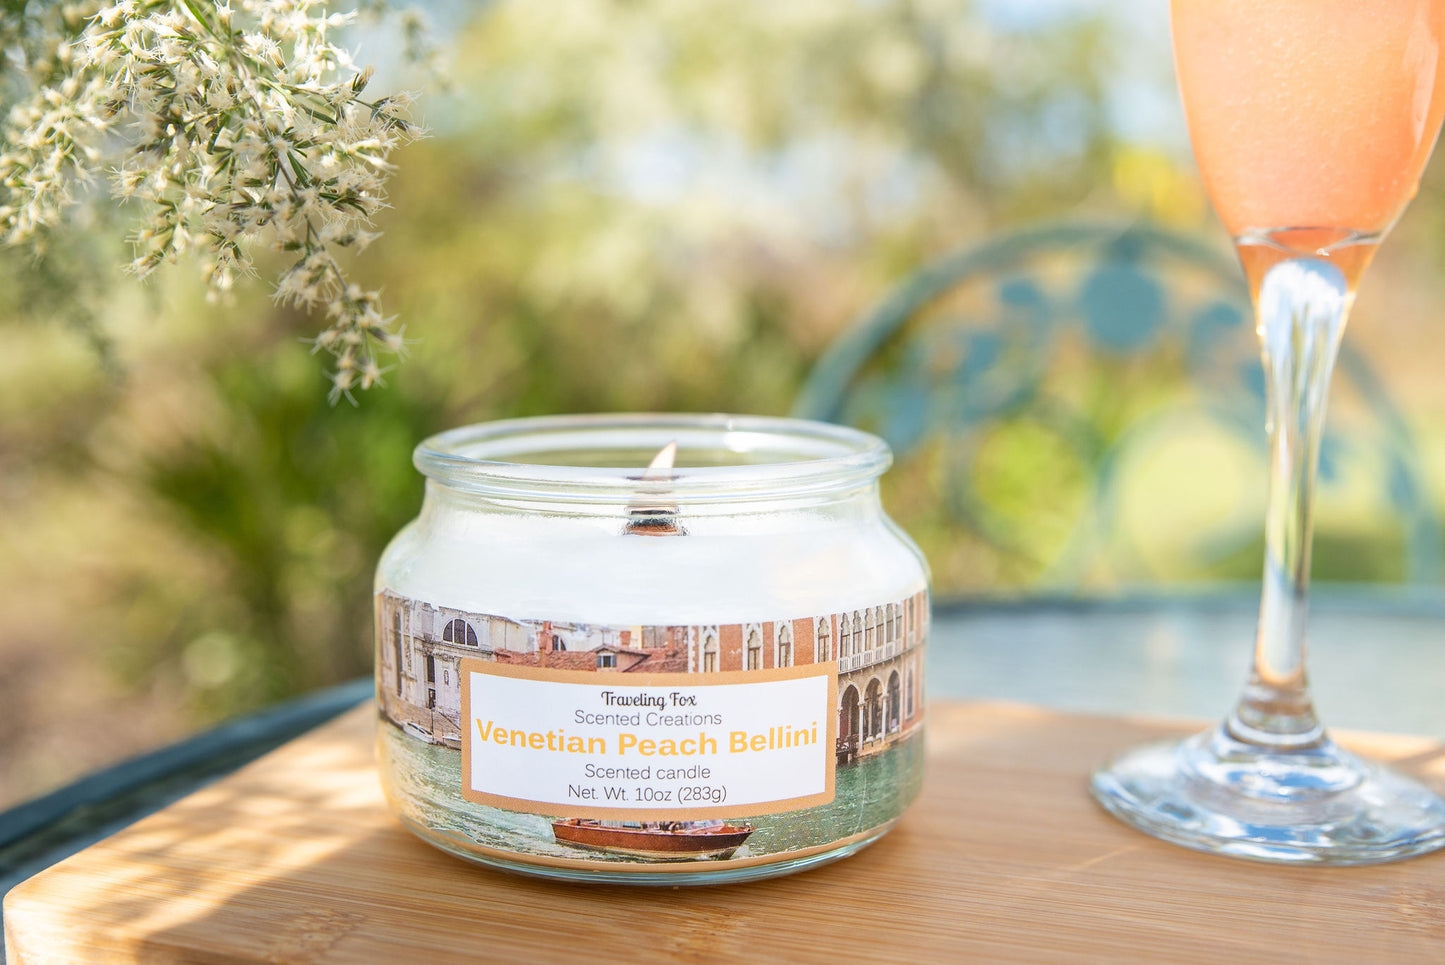 
                  
                    Venetian Peach Bellini Scented Candle - Traveling Fox Scented Creations
                  
                